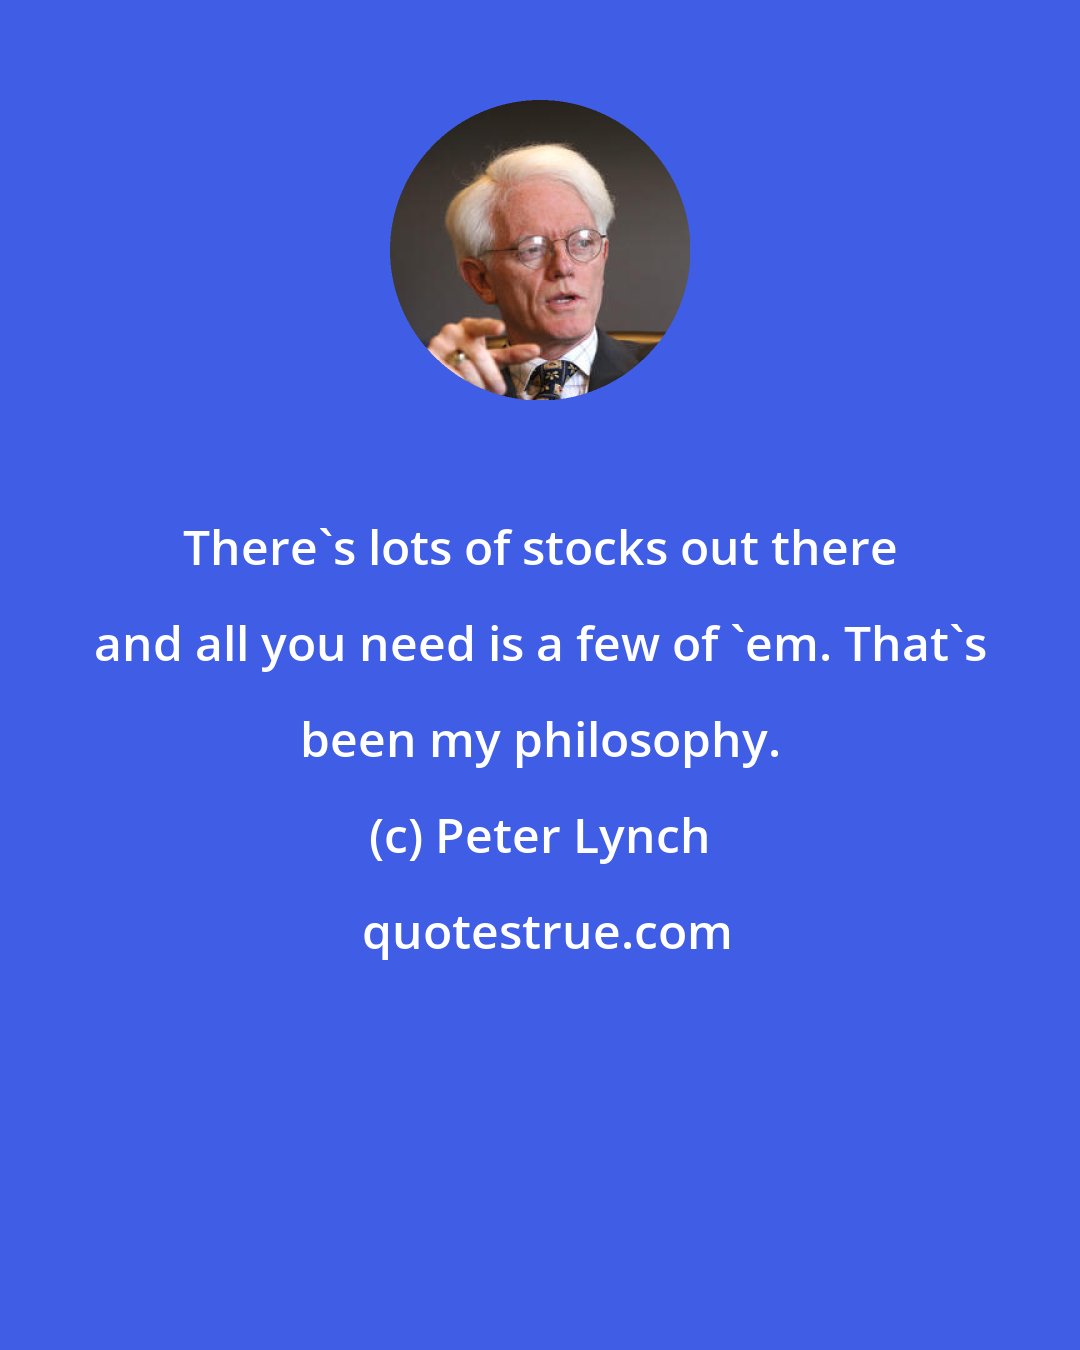 Peter Lynch: There's lots of stocks out there and all you need is a few of 'em. That's been my philosophy.